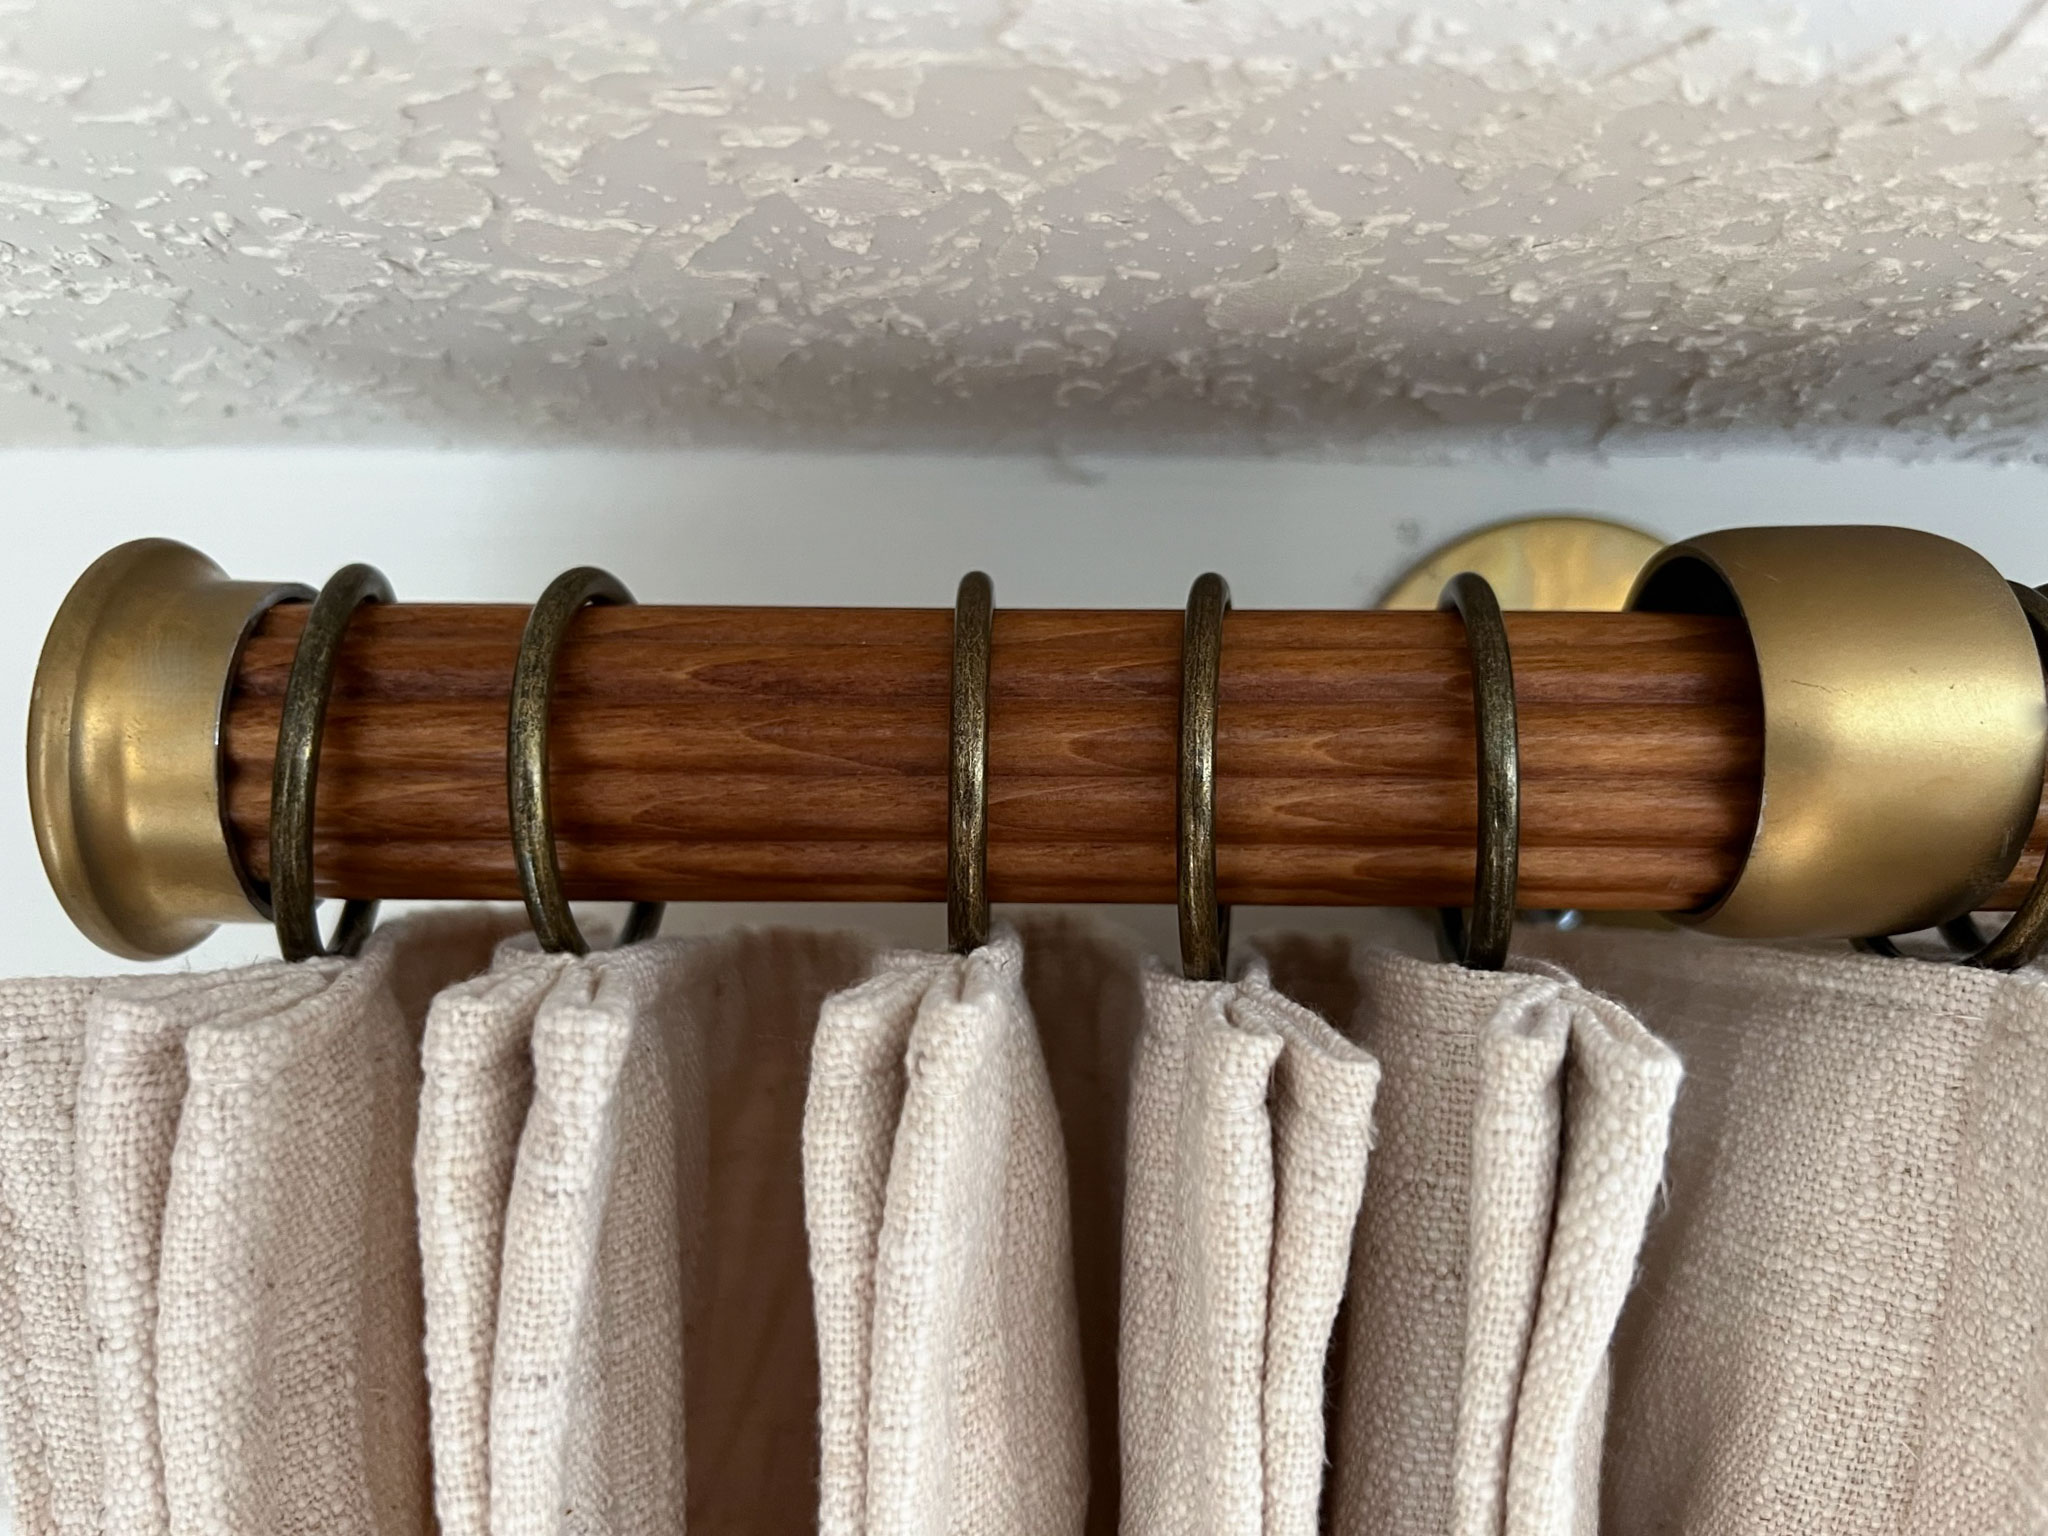 Curtain rod with rings and curtain installed